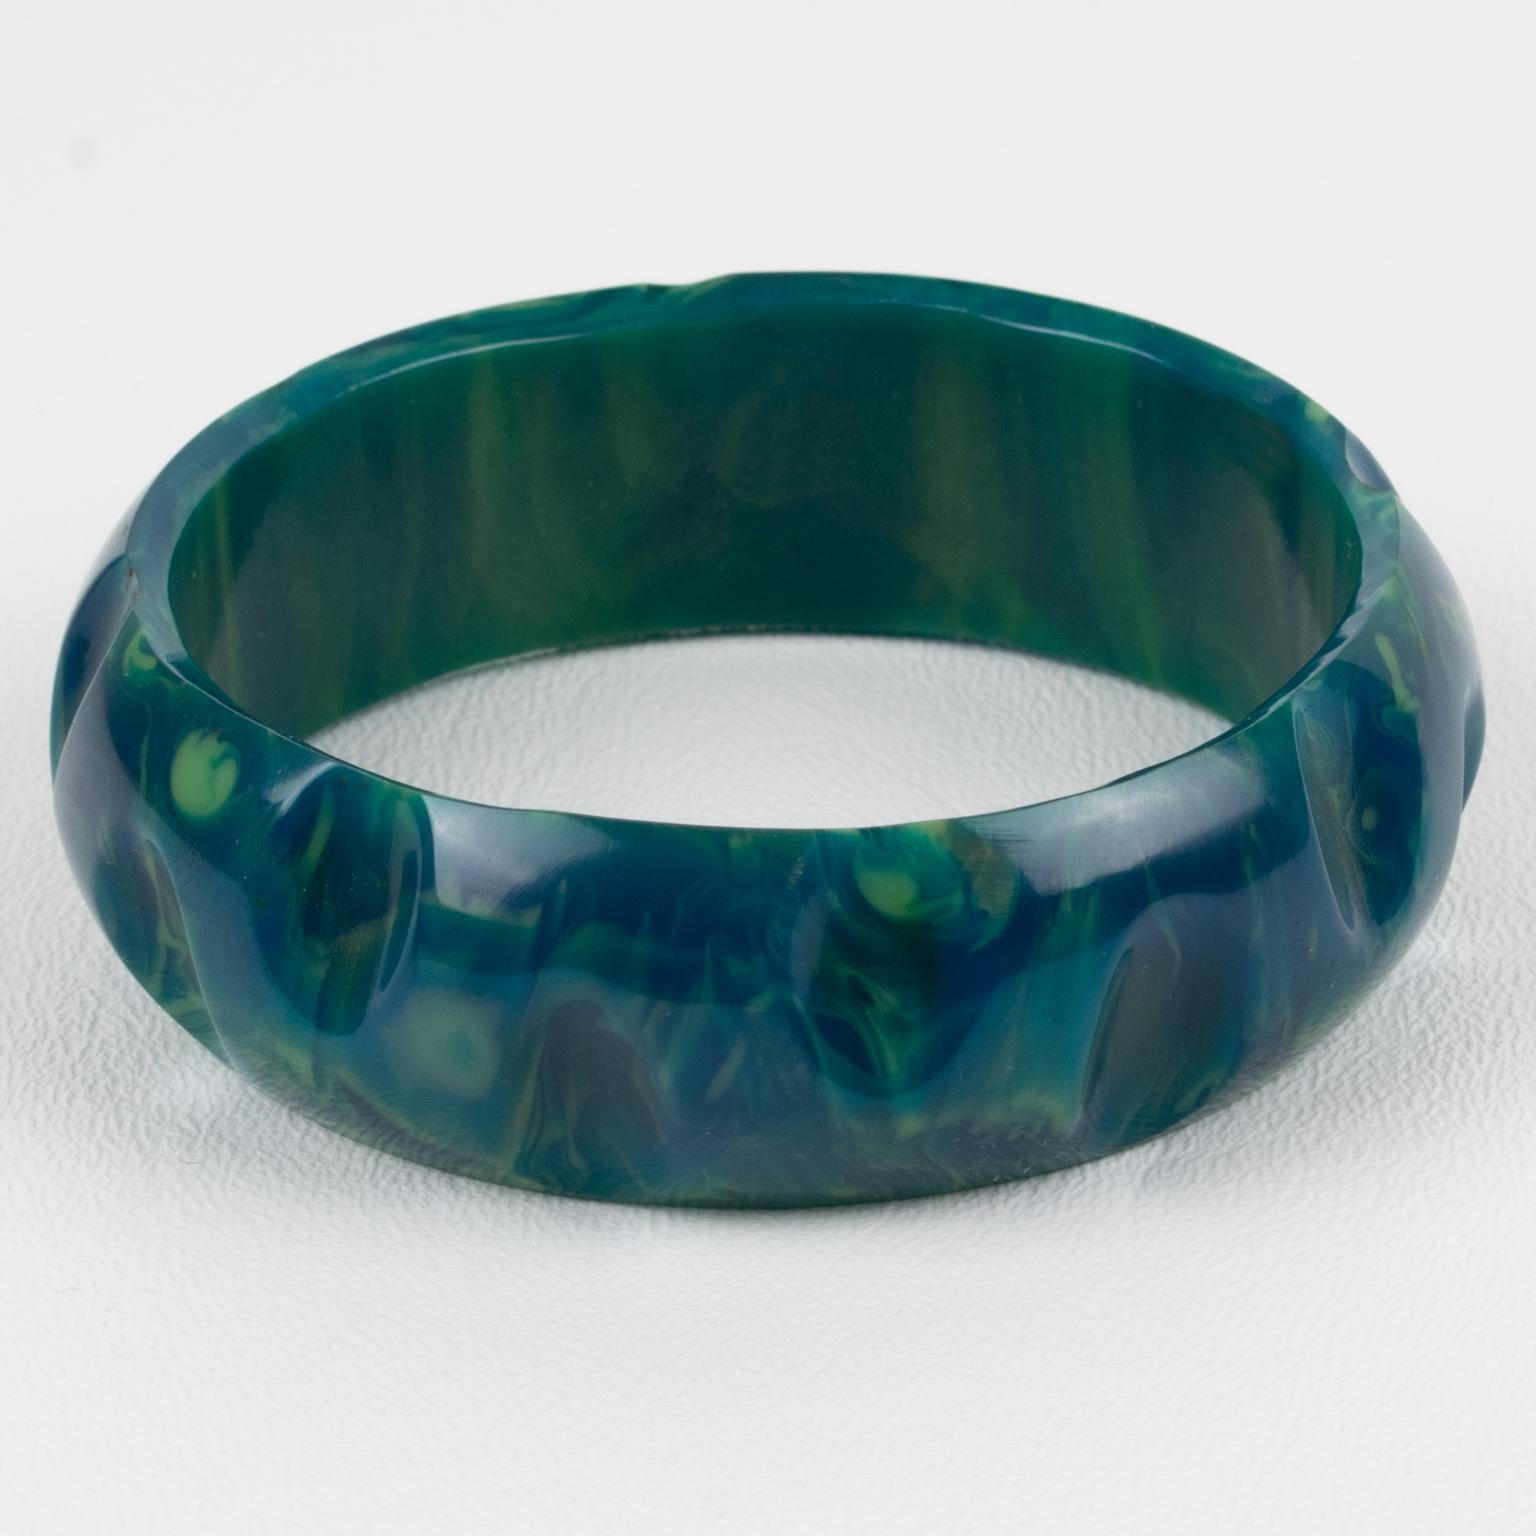 This is a gorgeous blue-moon marble Bakelite carved bracelet bangle. It features a chunky domed shape with a geometric carving design. The color is an intense blue marble with green and white cloudy swirling. 
Measurements: Inside across is 2.57 in